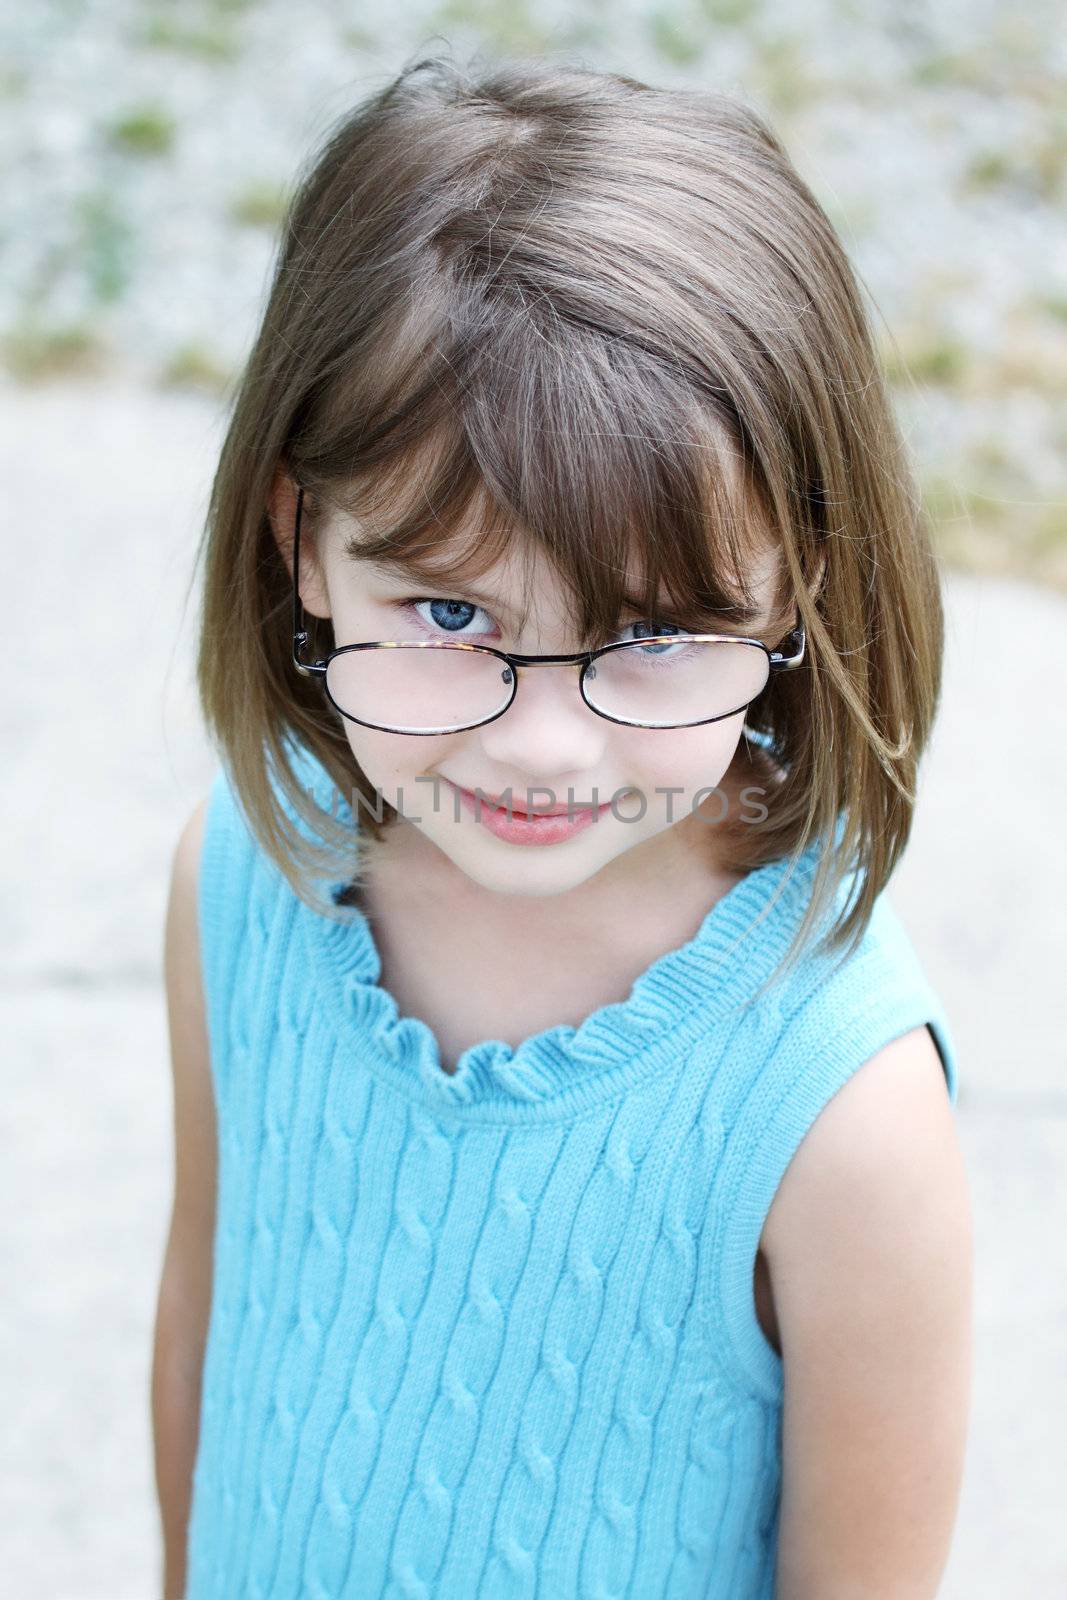 Little girl outdoors wearing glasses and looking up into the camera.
